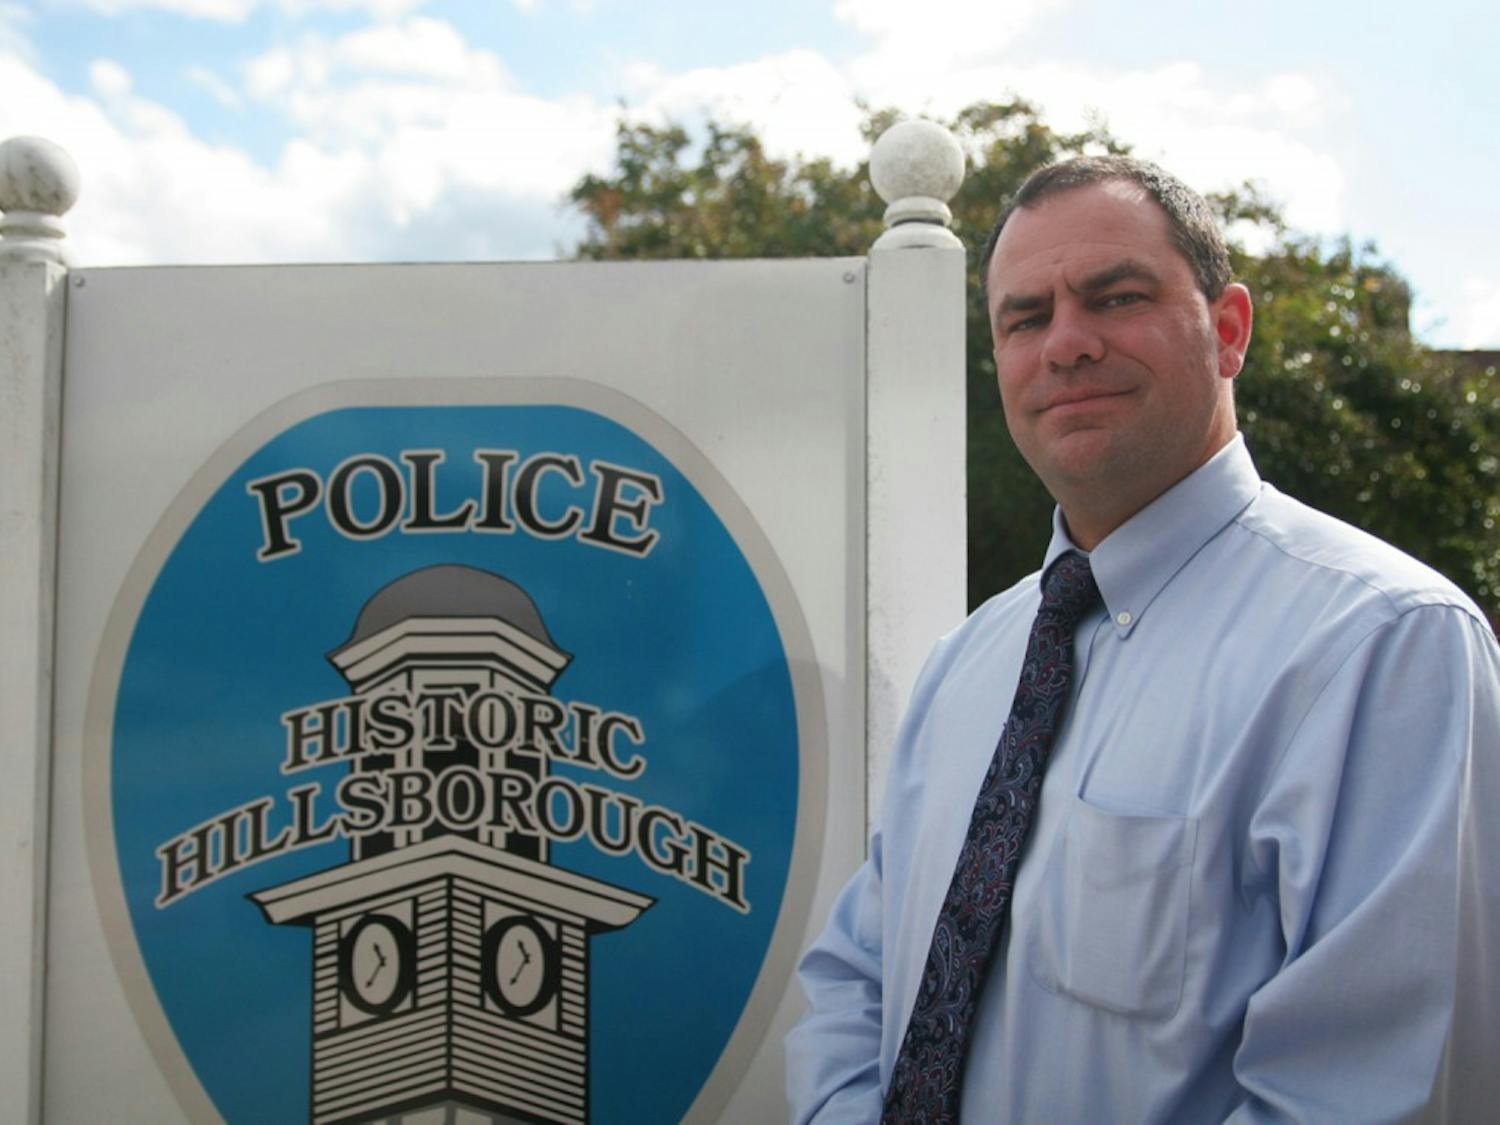 Duane Hampton, currently a lieutenant with the Durham Police Department, will become the chief of police for the town of Hillsborough on Nov. 1.